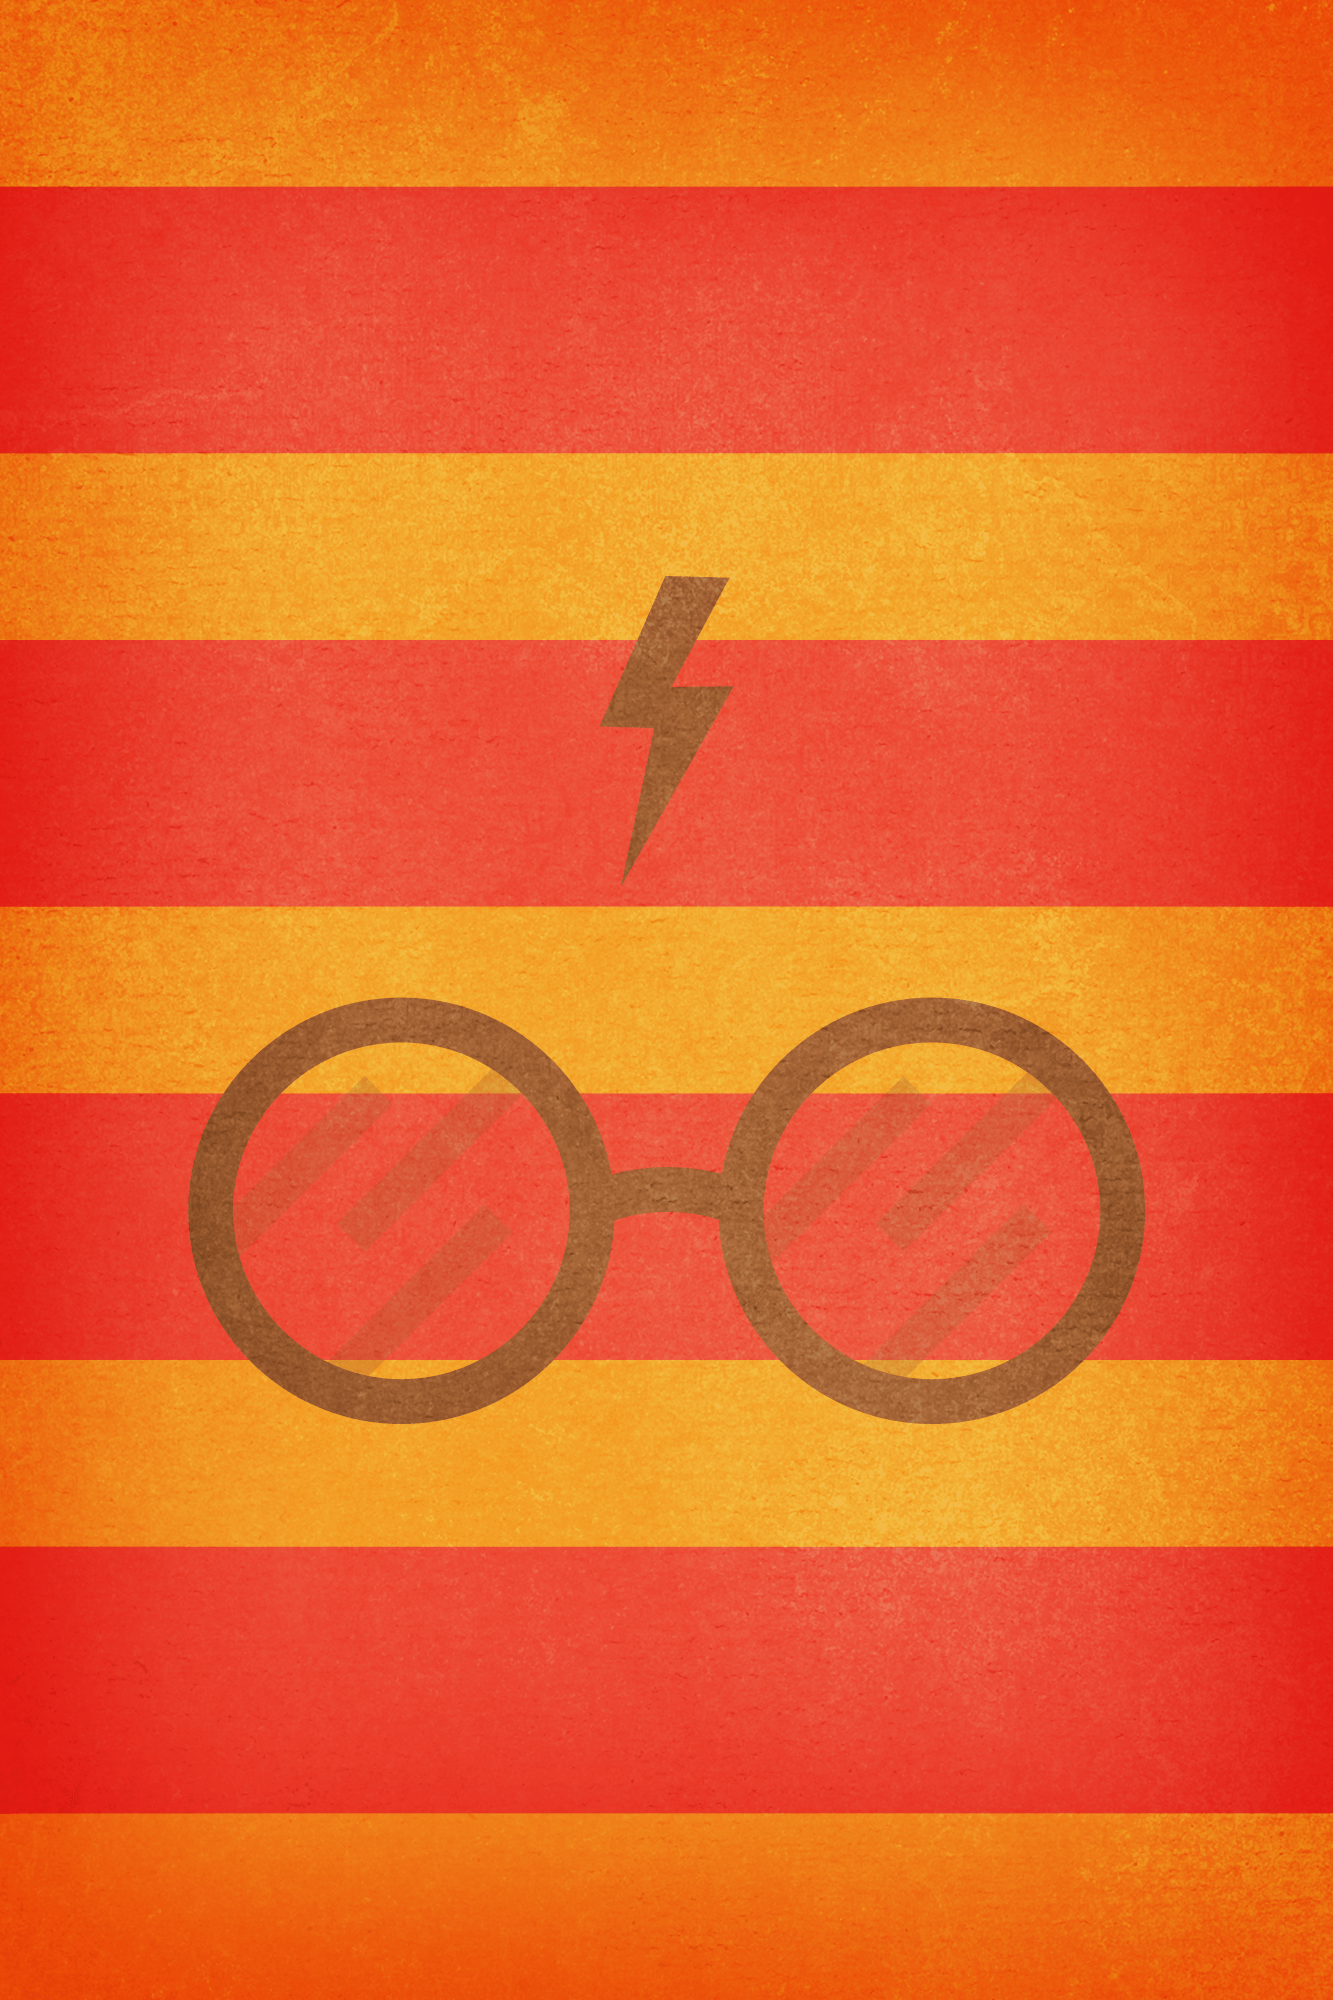 A poster of harry potter glasses on an orange and yellow striped background - Harry Potter